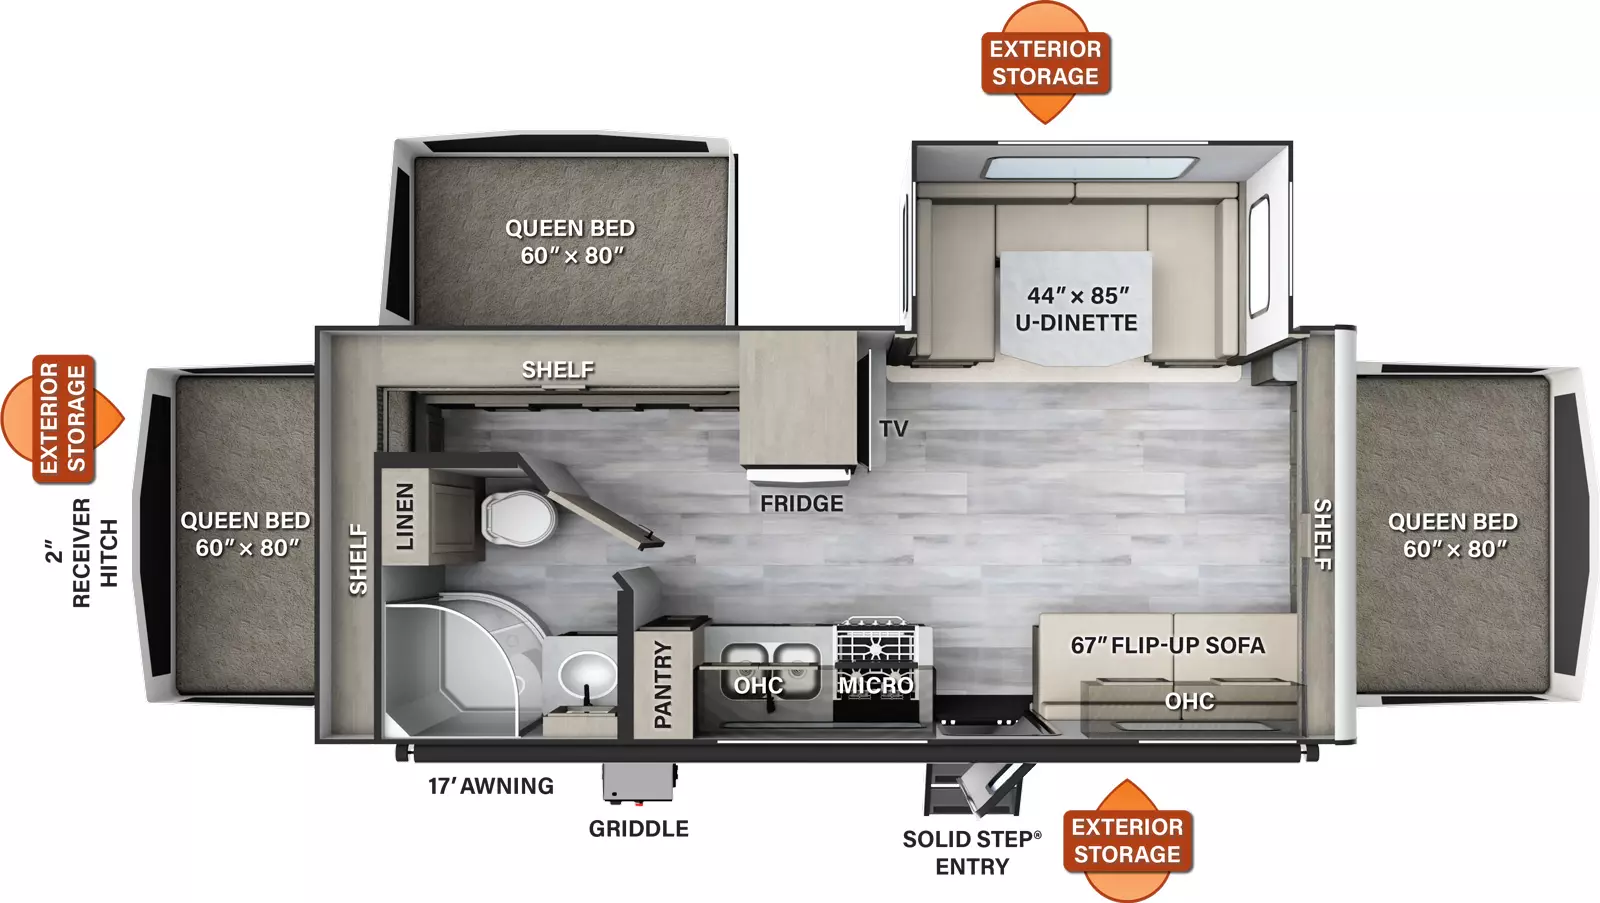 The 233S has one slide out and one entry door. Exterior features include a 17 foot awning, griddle, exterior storage on both sides and rear, and 2 inch receiver hitch. Interior layout from front to back: front queen tent bed with shelf above; off-door side u-dinette slideout, TV, refrigerator, and queen bed tent with shelf above; door side flip-up sofa, overhead cabinet, entry, microwave, cooktop, sink, overhead cabinet, pantry and side aisle bathroom; rear queen tent bed with shelf above.